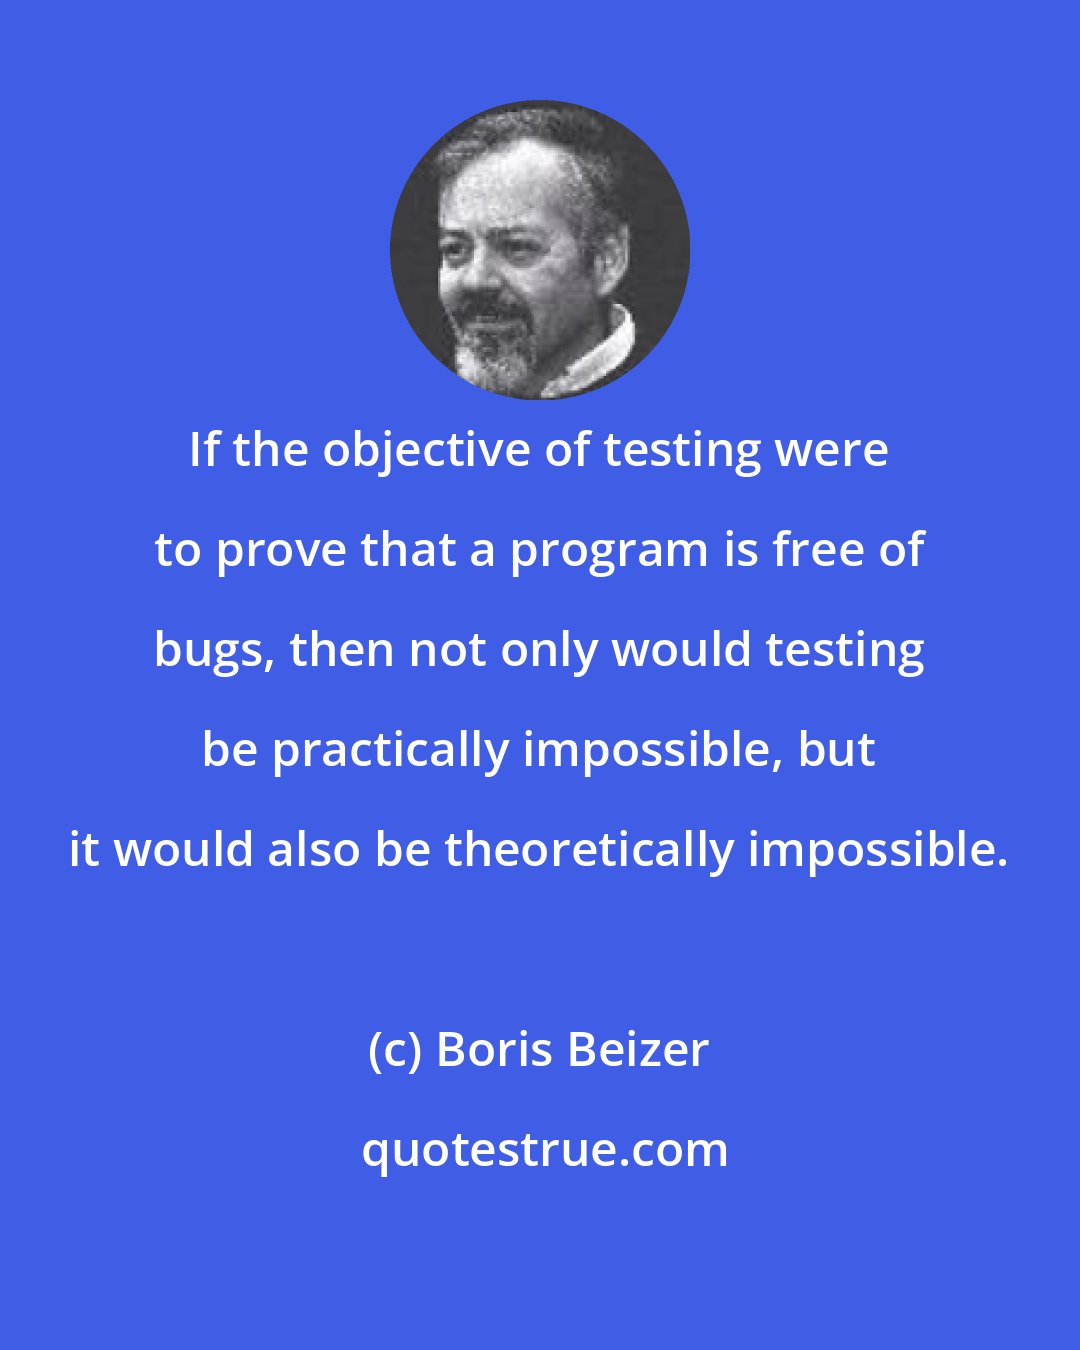 Boris Beizer: If the objective of testing were to prove that a program is free of bugs, then not only would testing be practically impossible, but it would also be theoretically impossible.